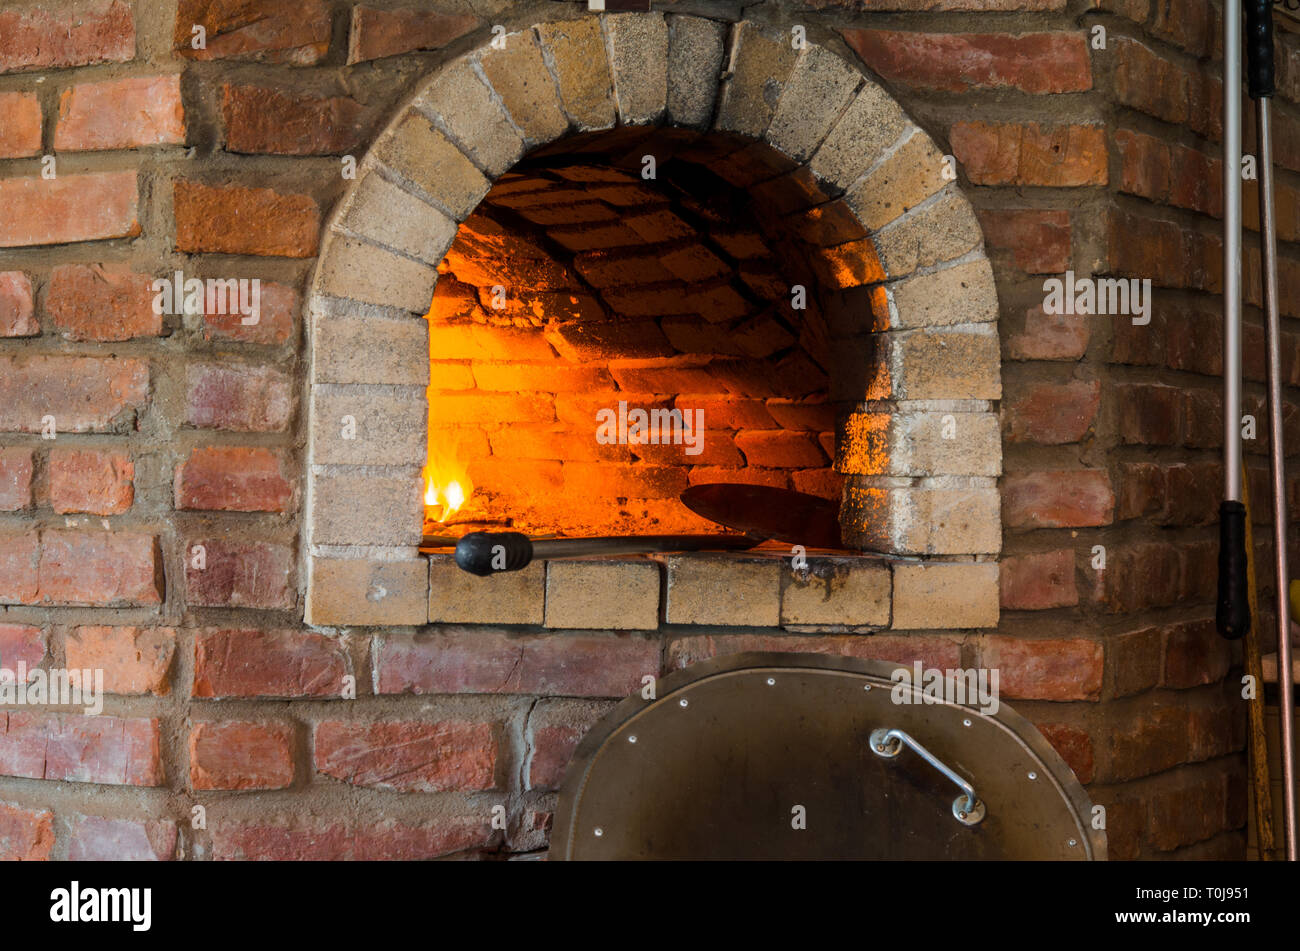 Image Clay Oven With Fire Stock Photo, Picture and Royalty Free Image.  Image 141417249.